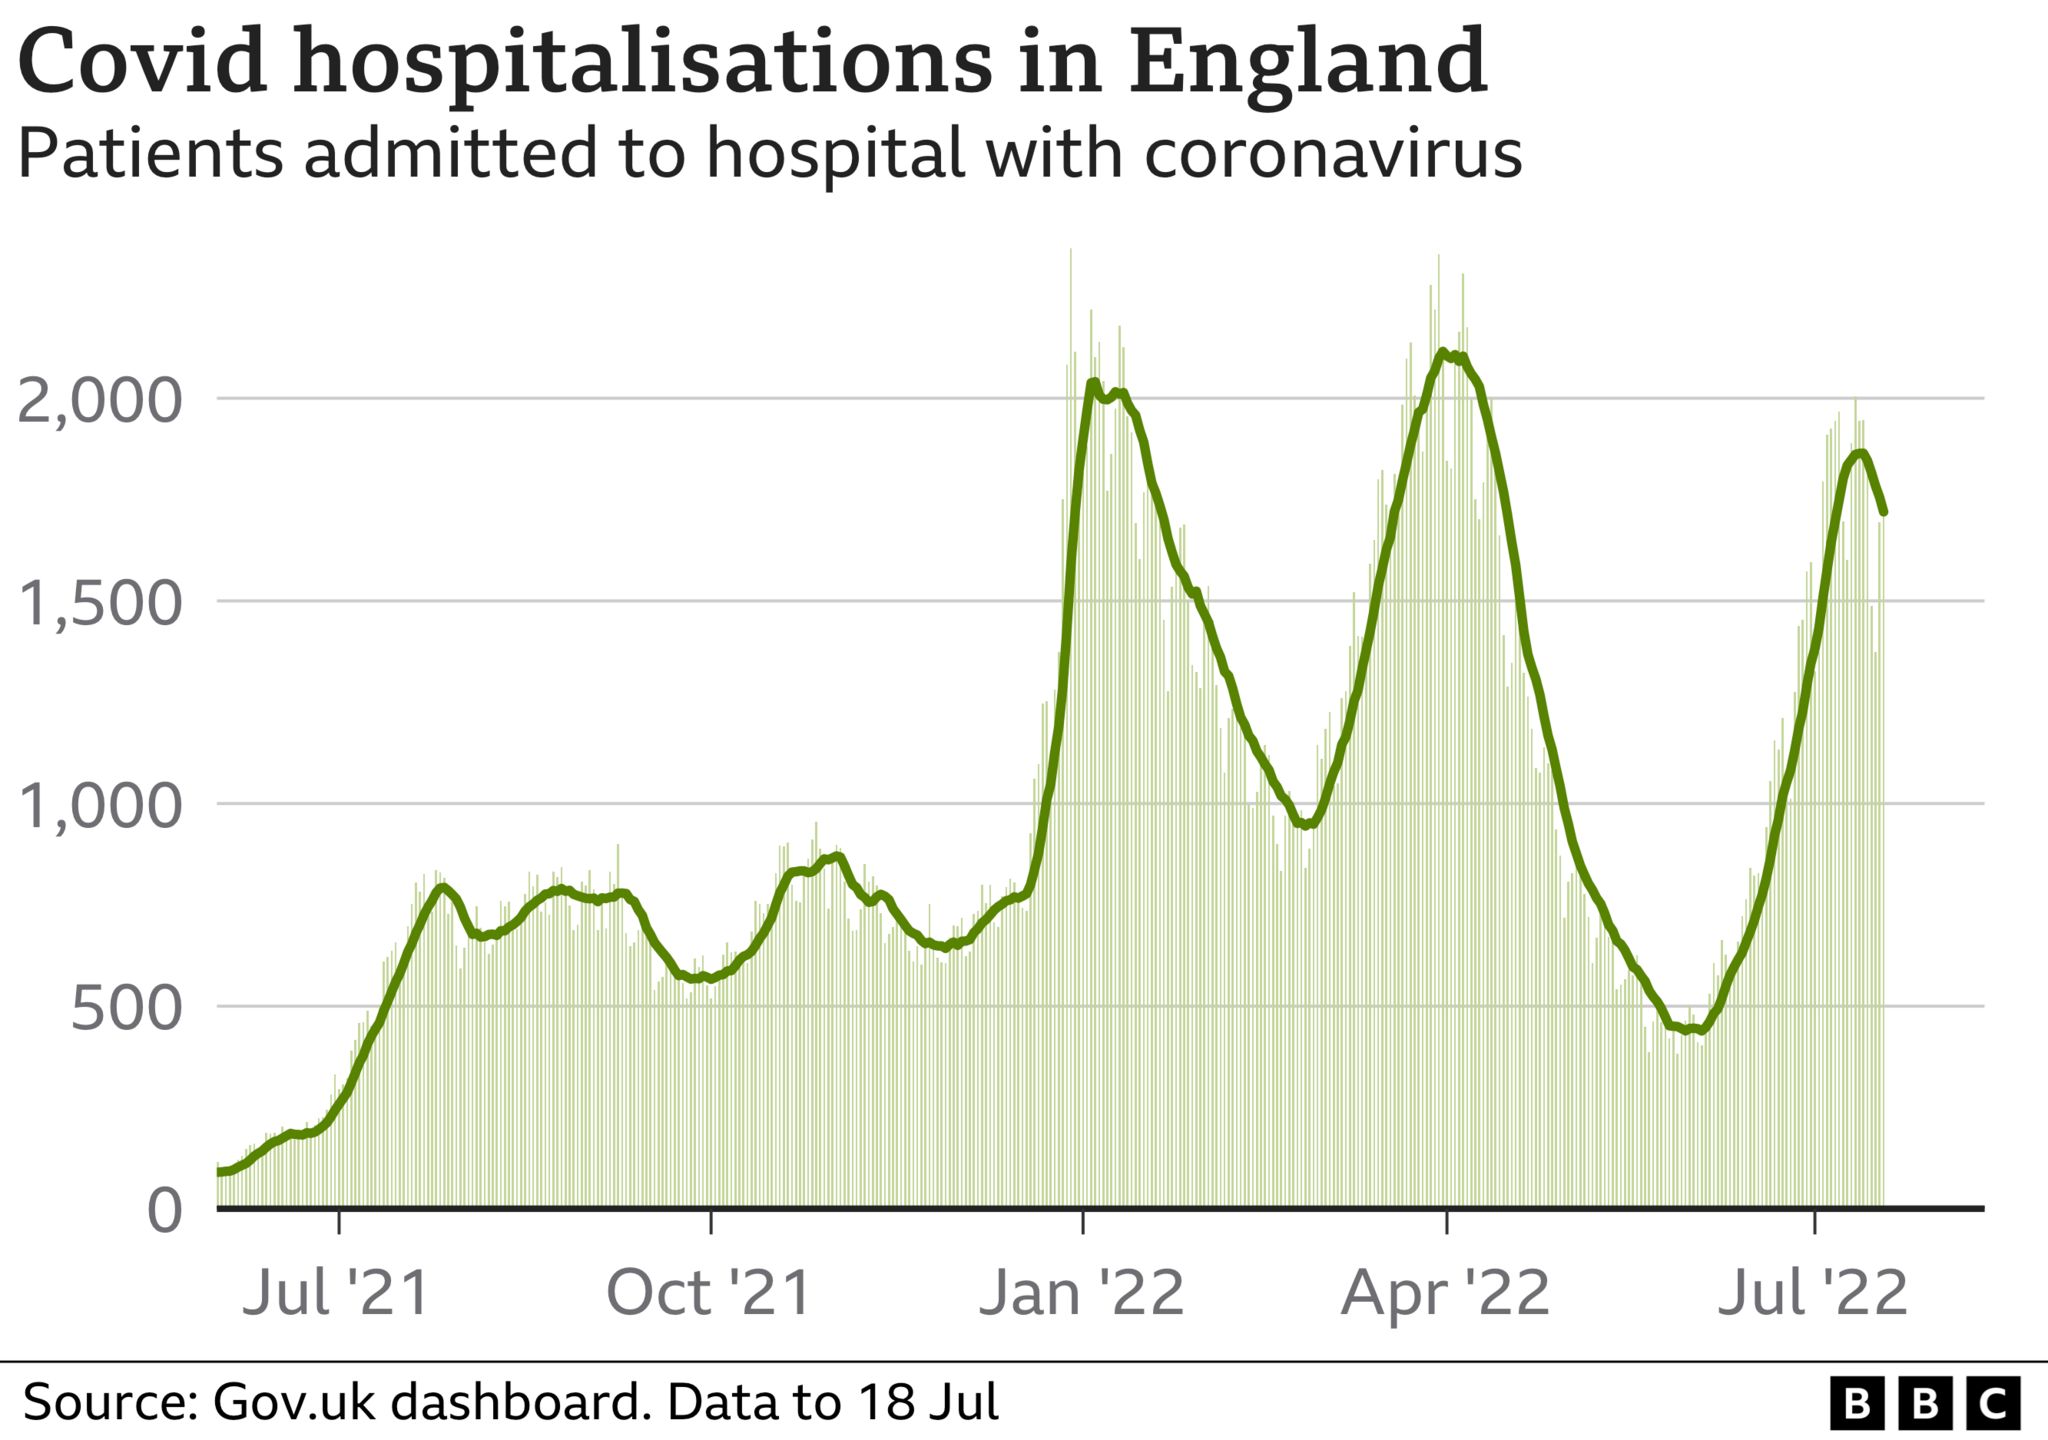 Graph of Covid hospitalisations. Data from the UK Government dashboard